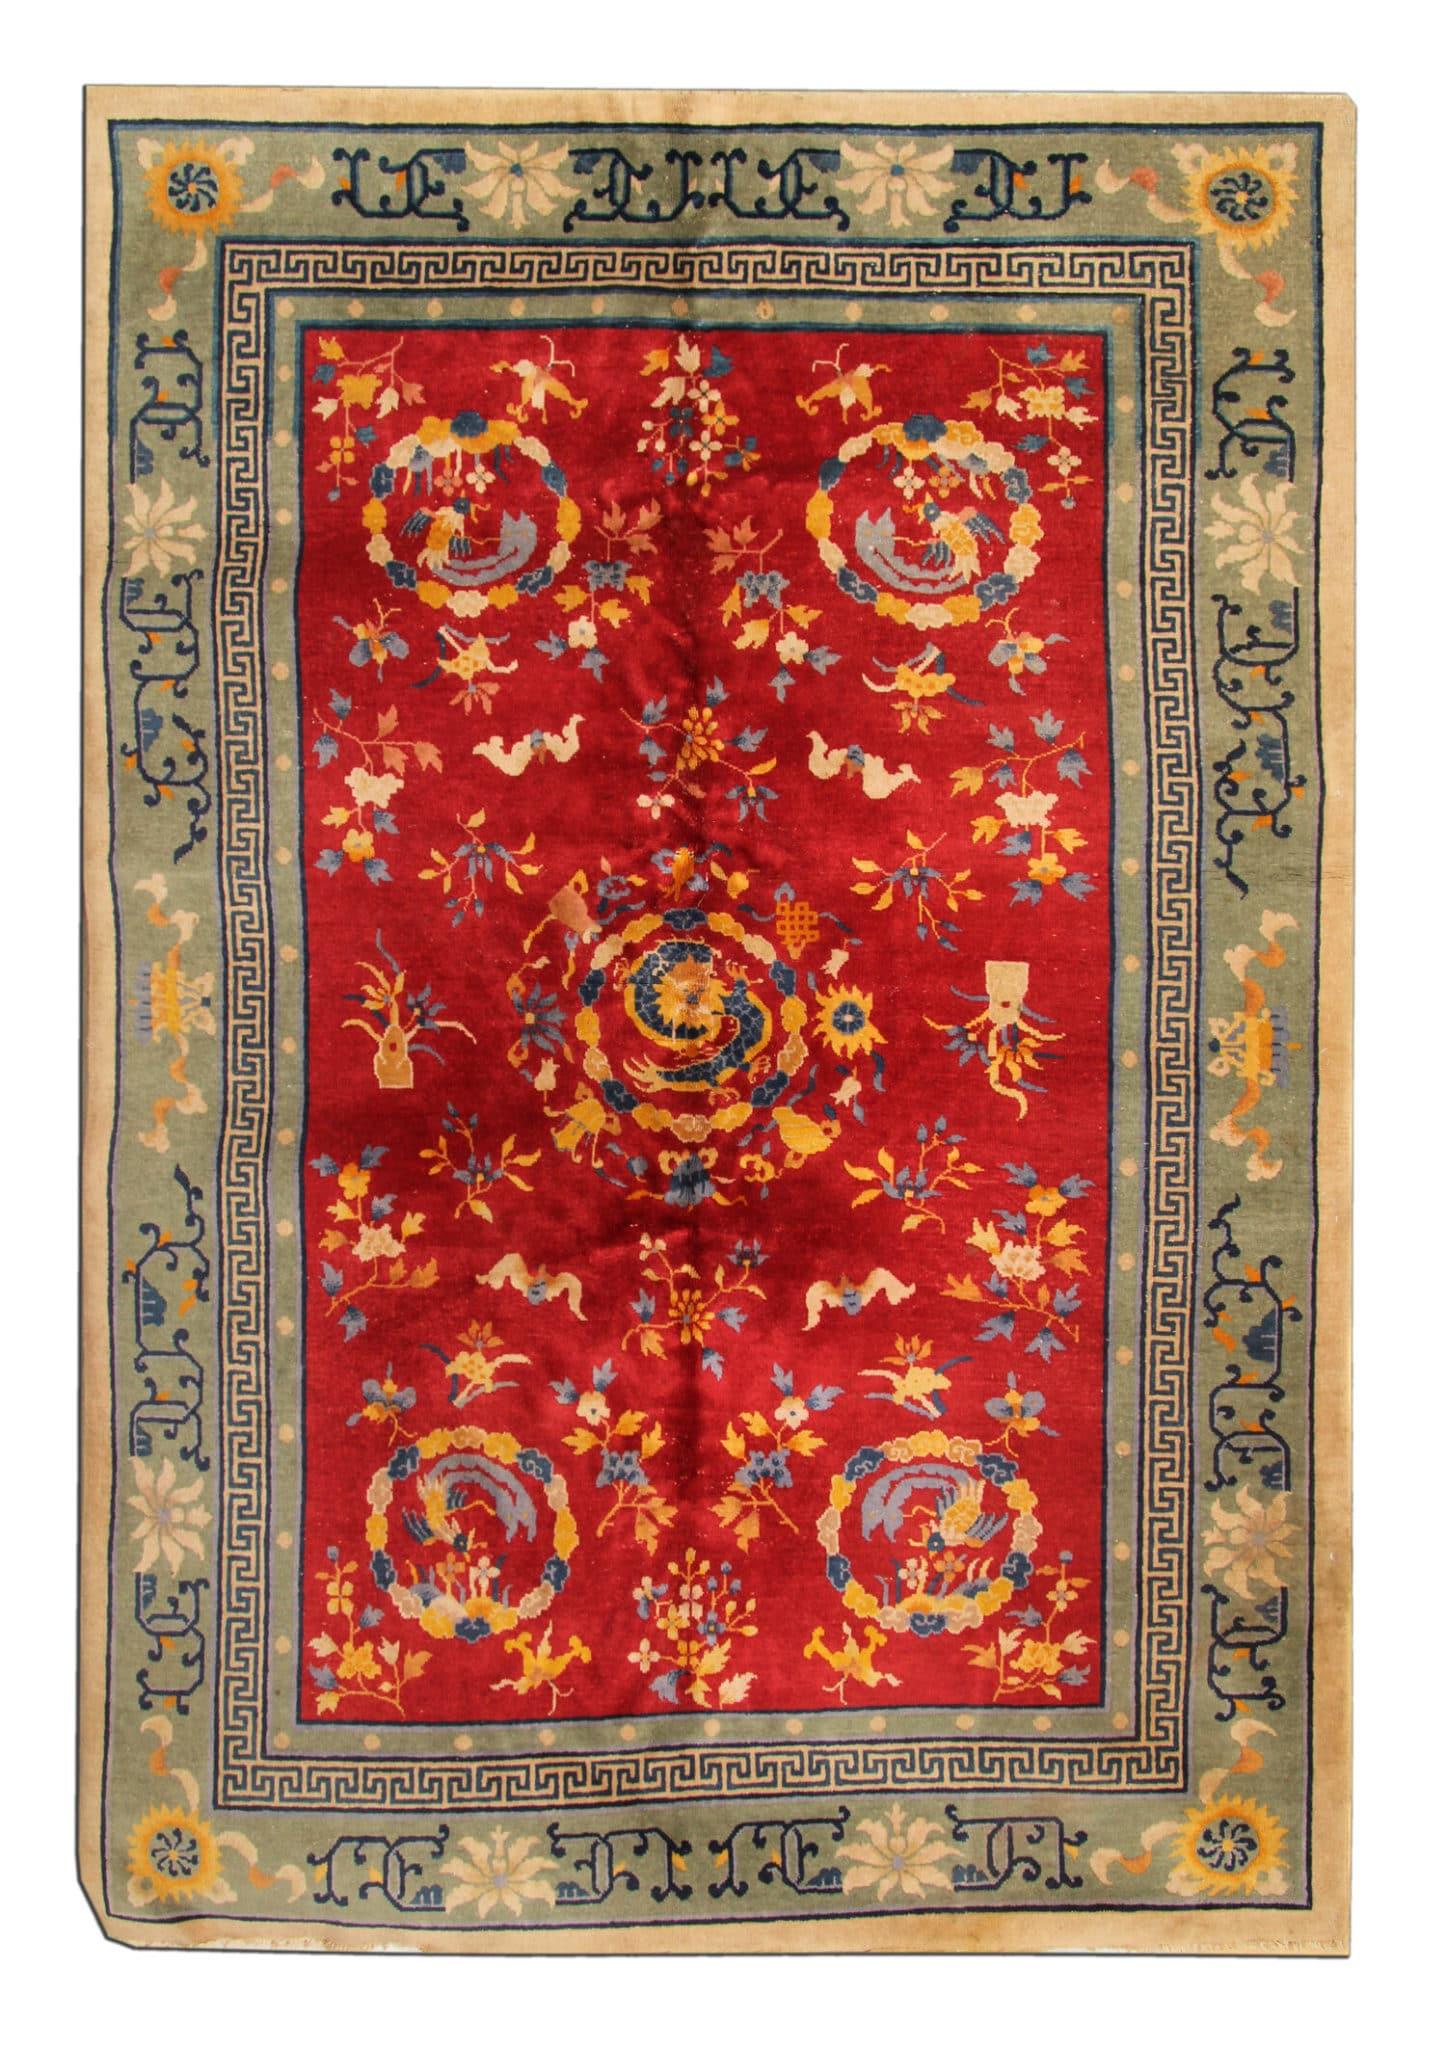 Hand-Knotted Red Antique Rug, Art Deco Vintage Rug Oriental Handmade Carpet Chinese Rugs For Sale